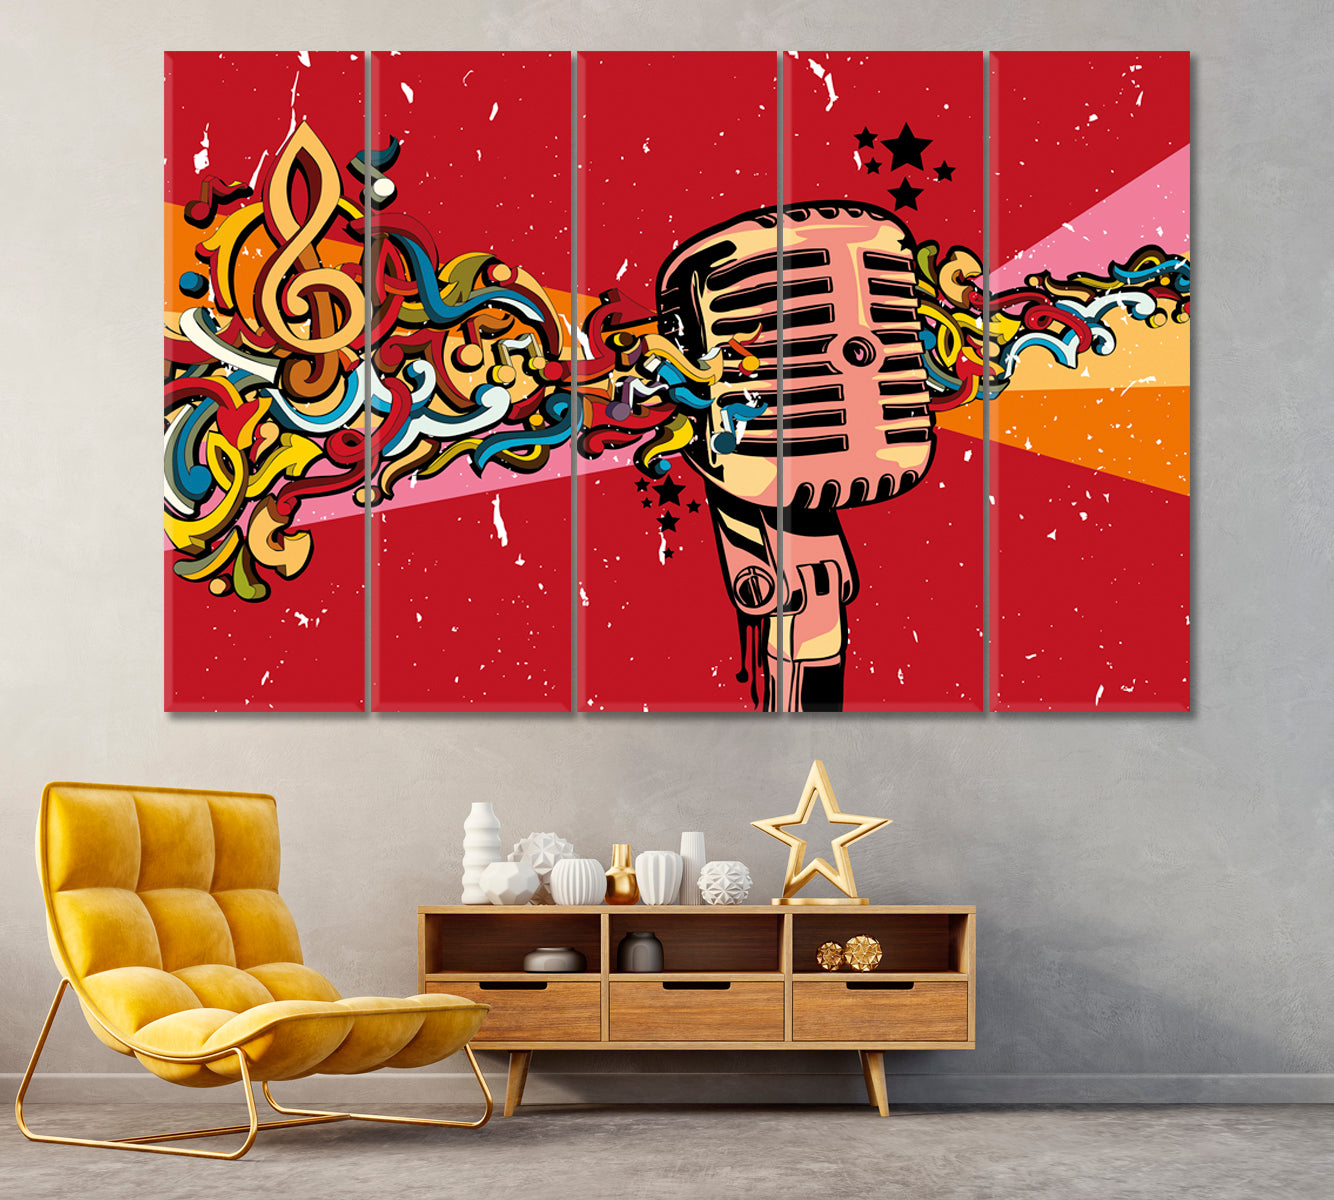 Vintage Microphone Canvas Print ArtLexy 5 Panels 36"x24" inches 